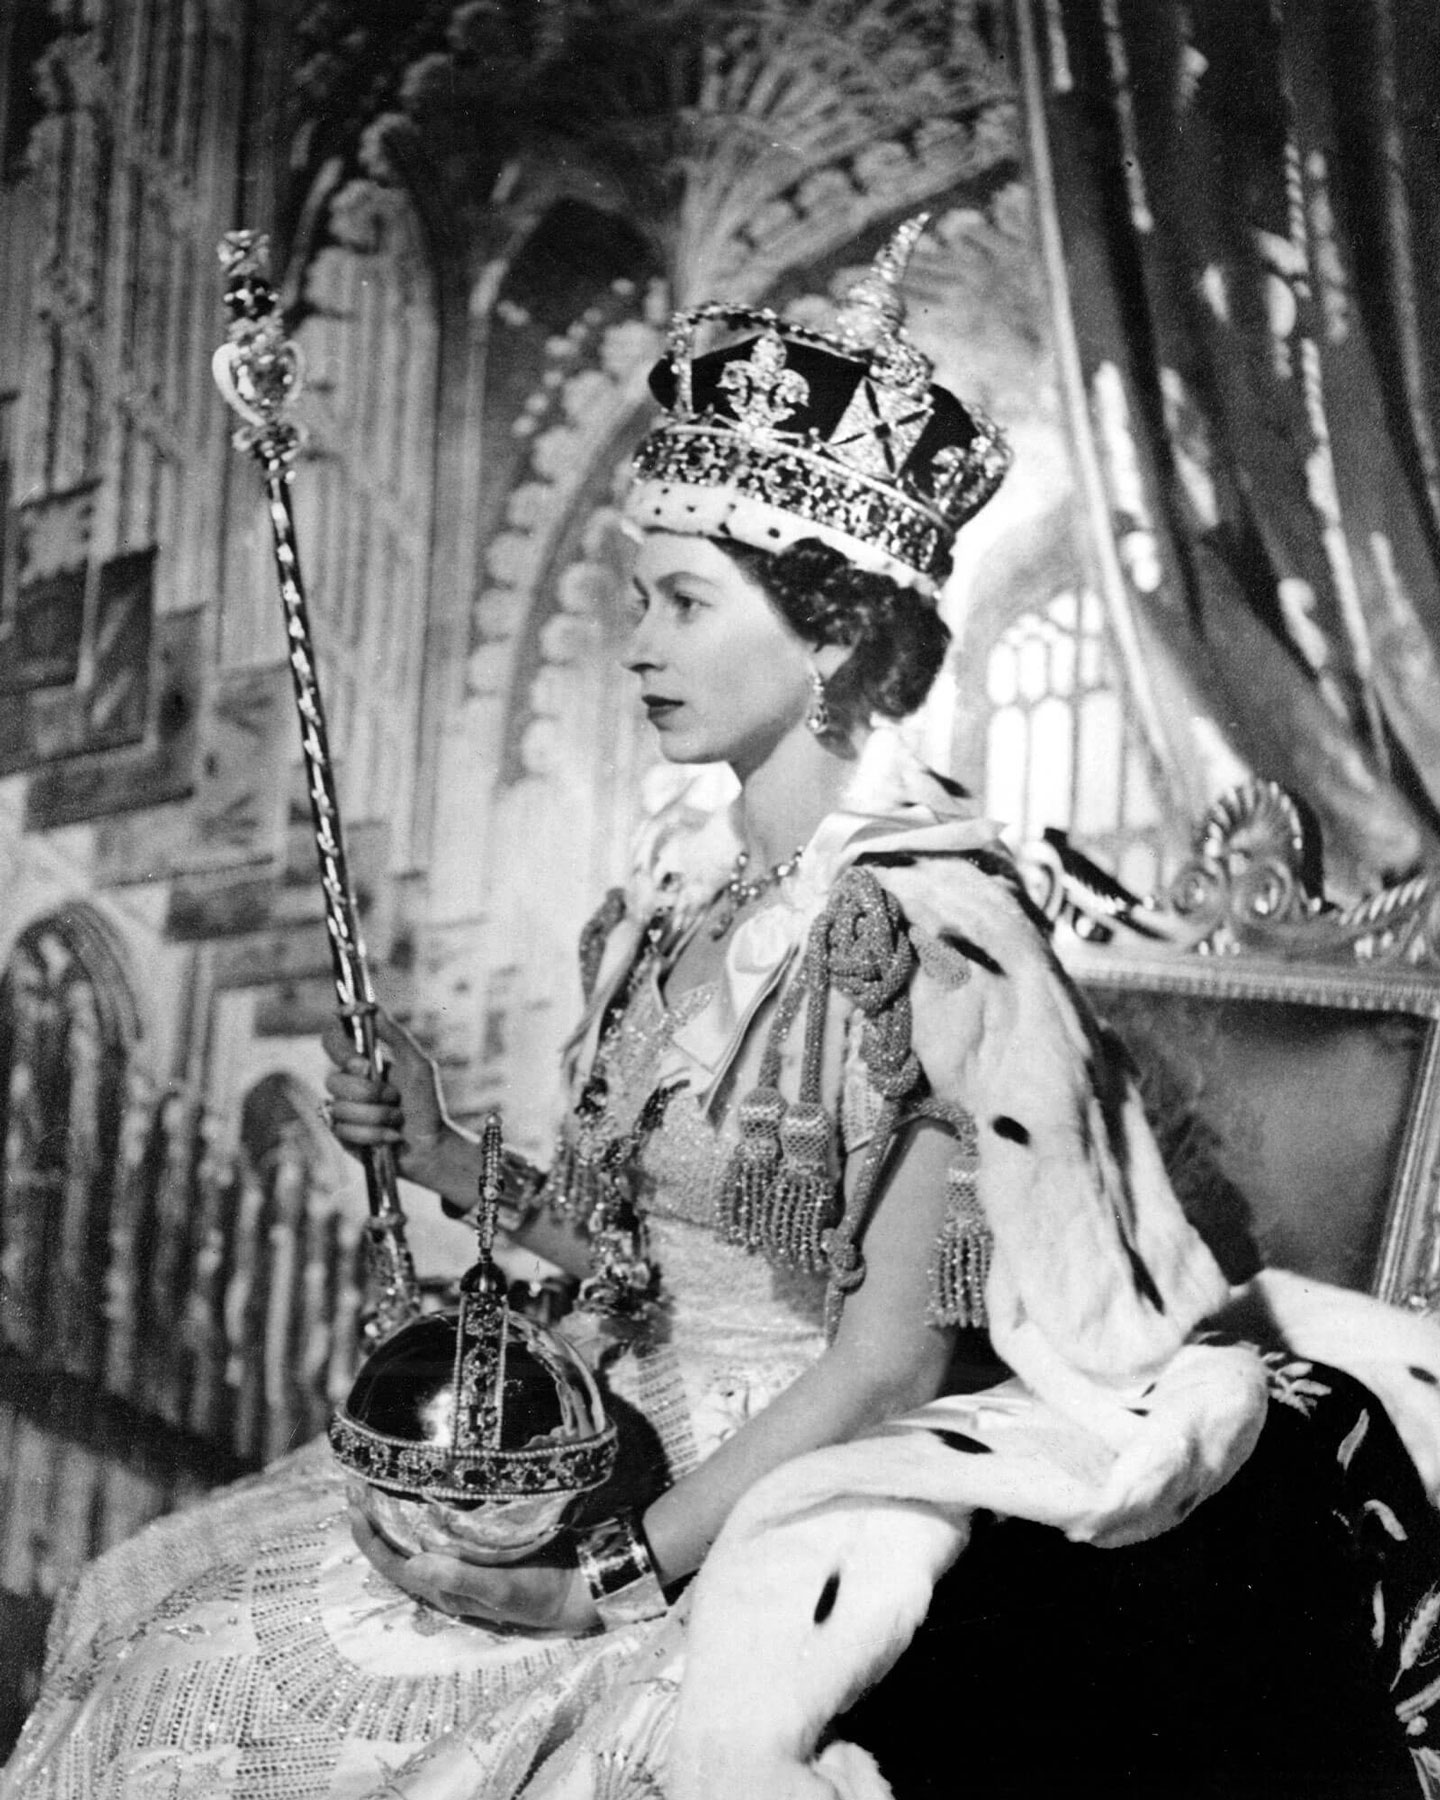 Elizabeth II's coronation in 1953. The Queen chose a gown richly embroidered with floral emblems of the United Kingdom and its dominions